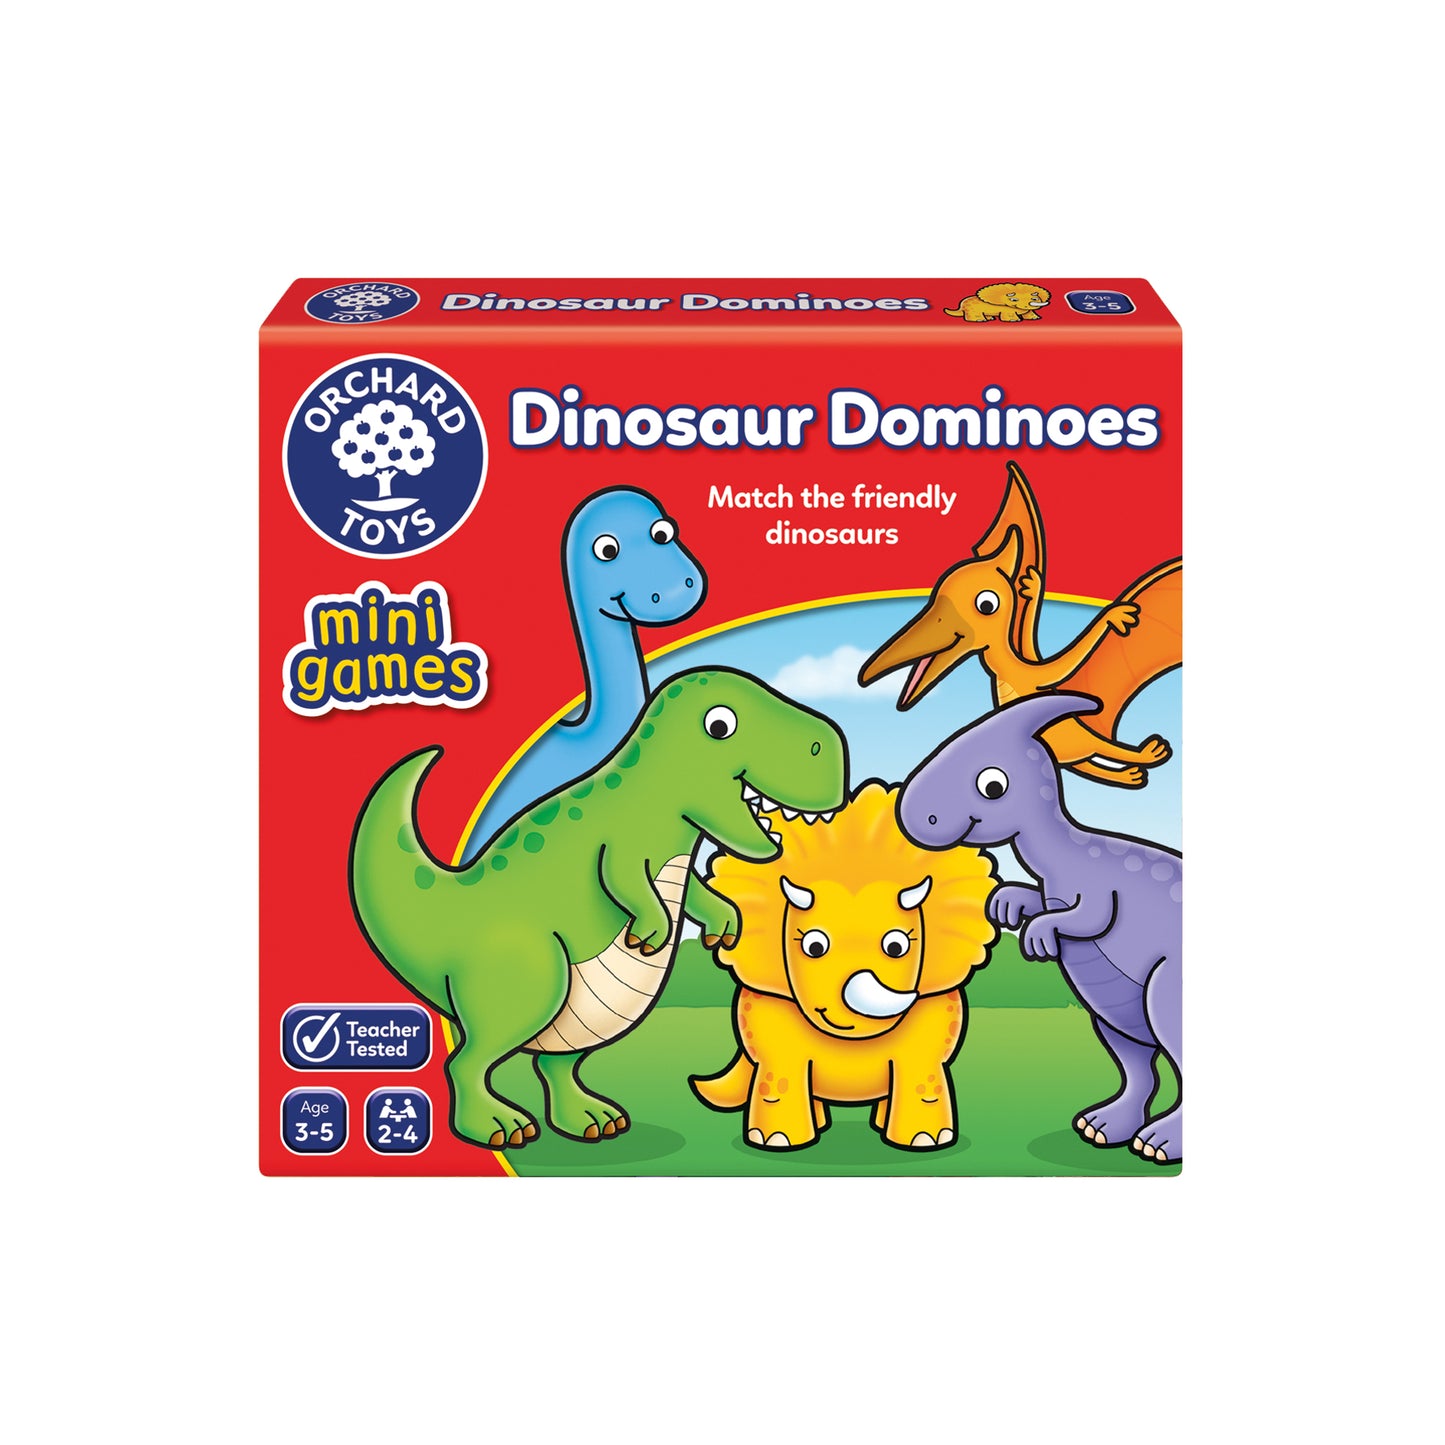 Orchard Toys Dinosaur Dominoes Mini Matching Game